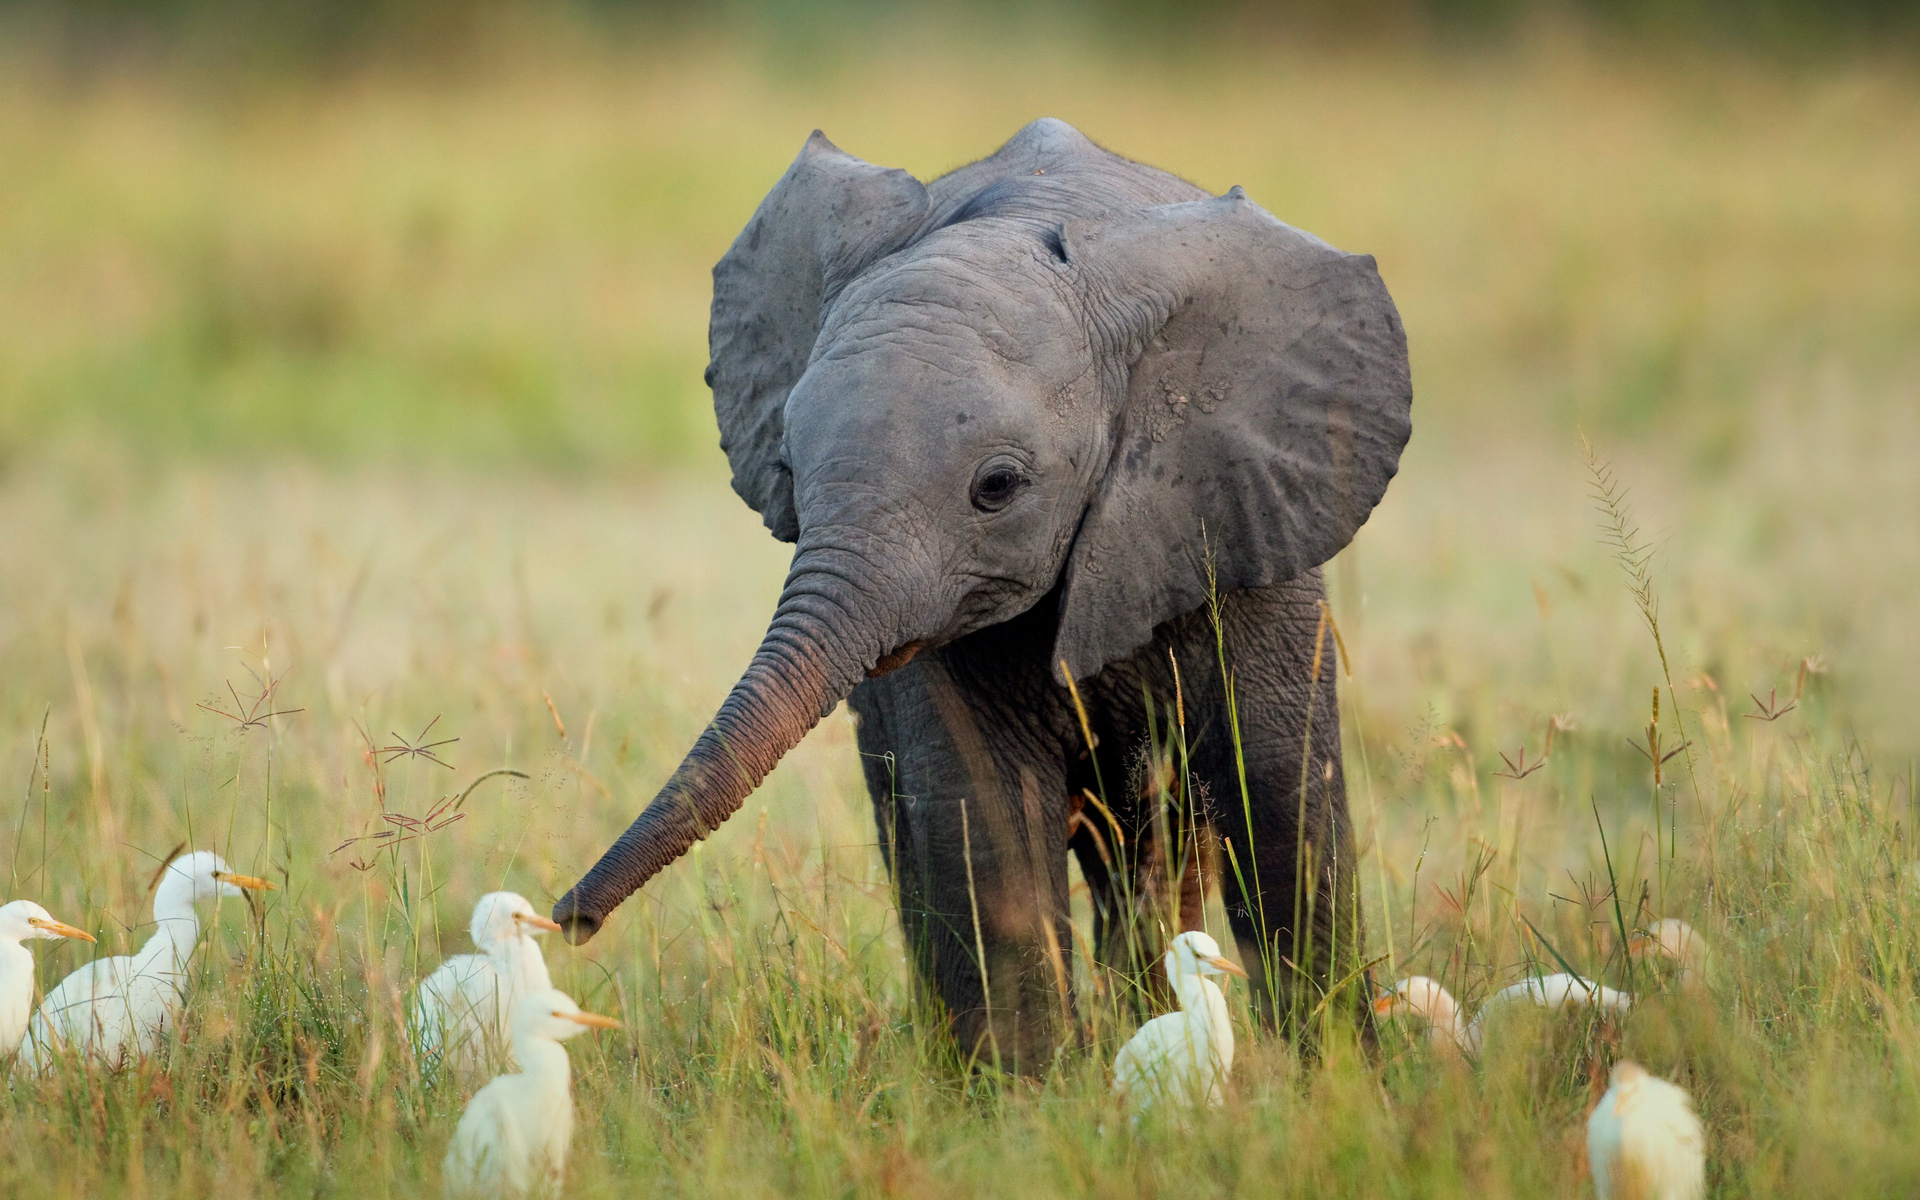 Elephant And Bird Wallpaper Image Pictures Photos